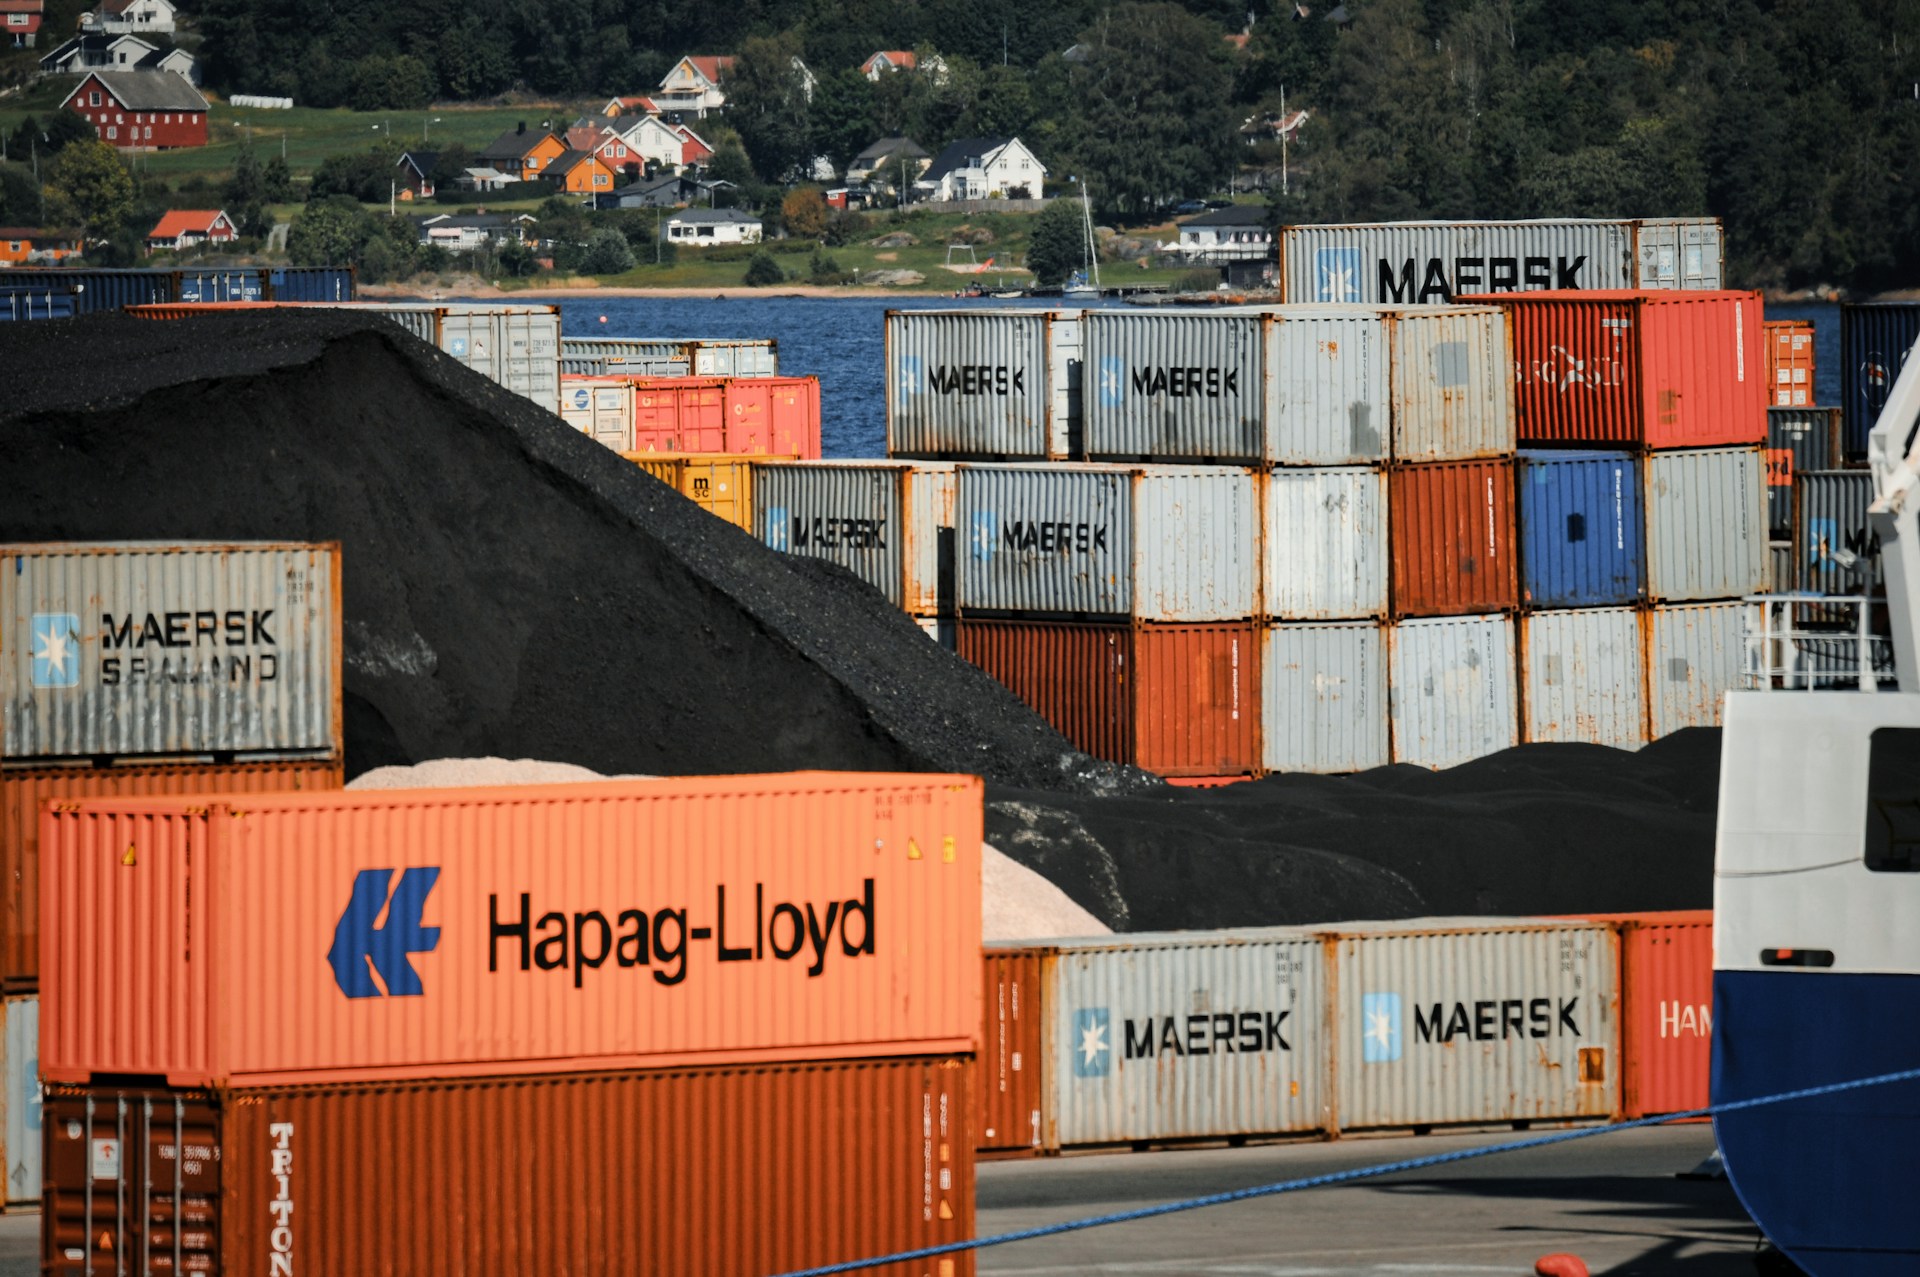 Hapag-Lloyd shipping containers